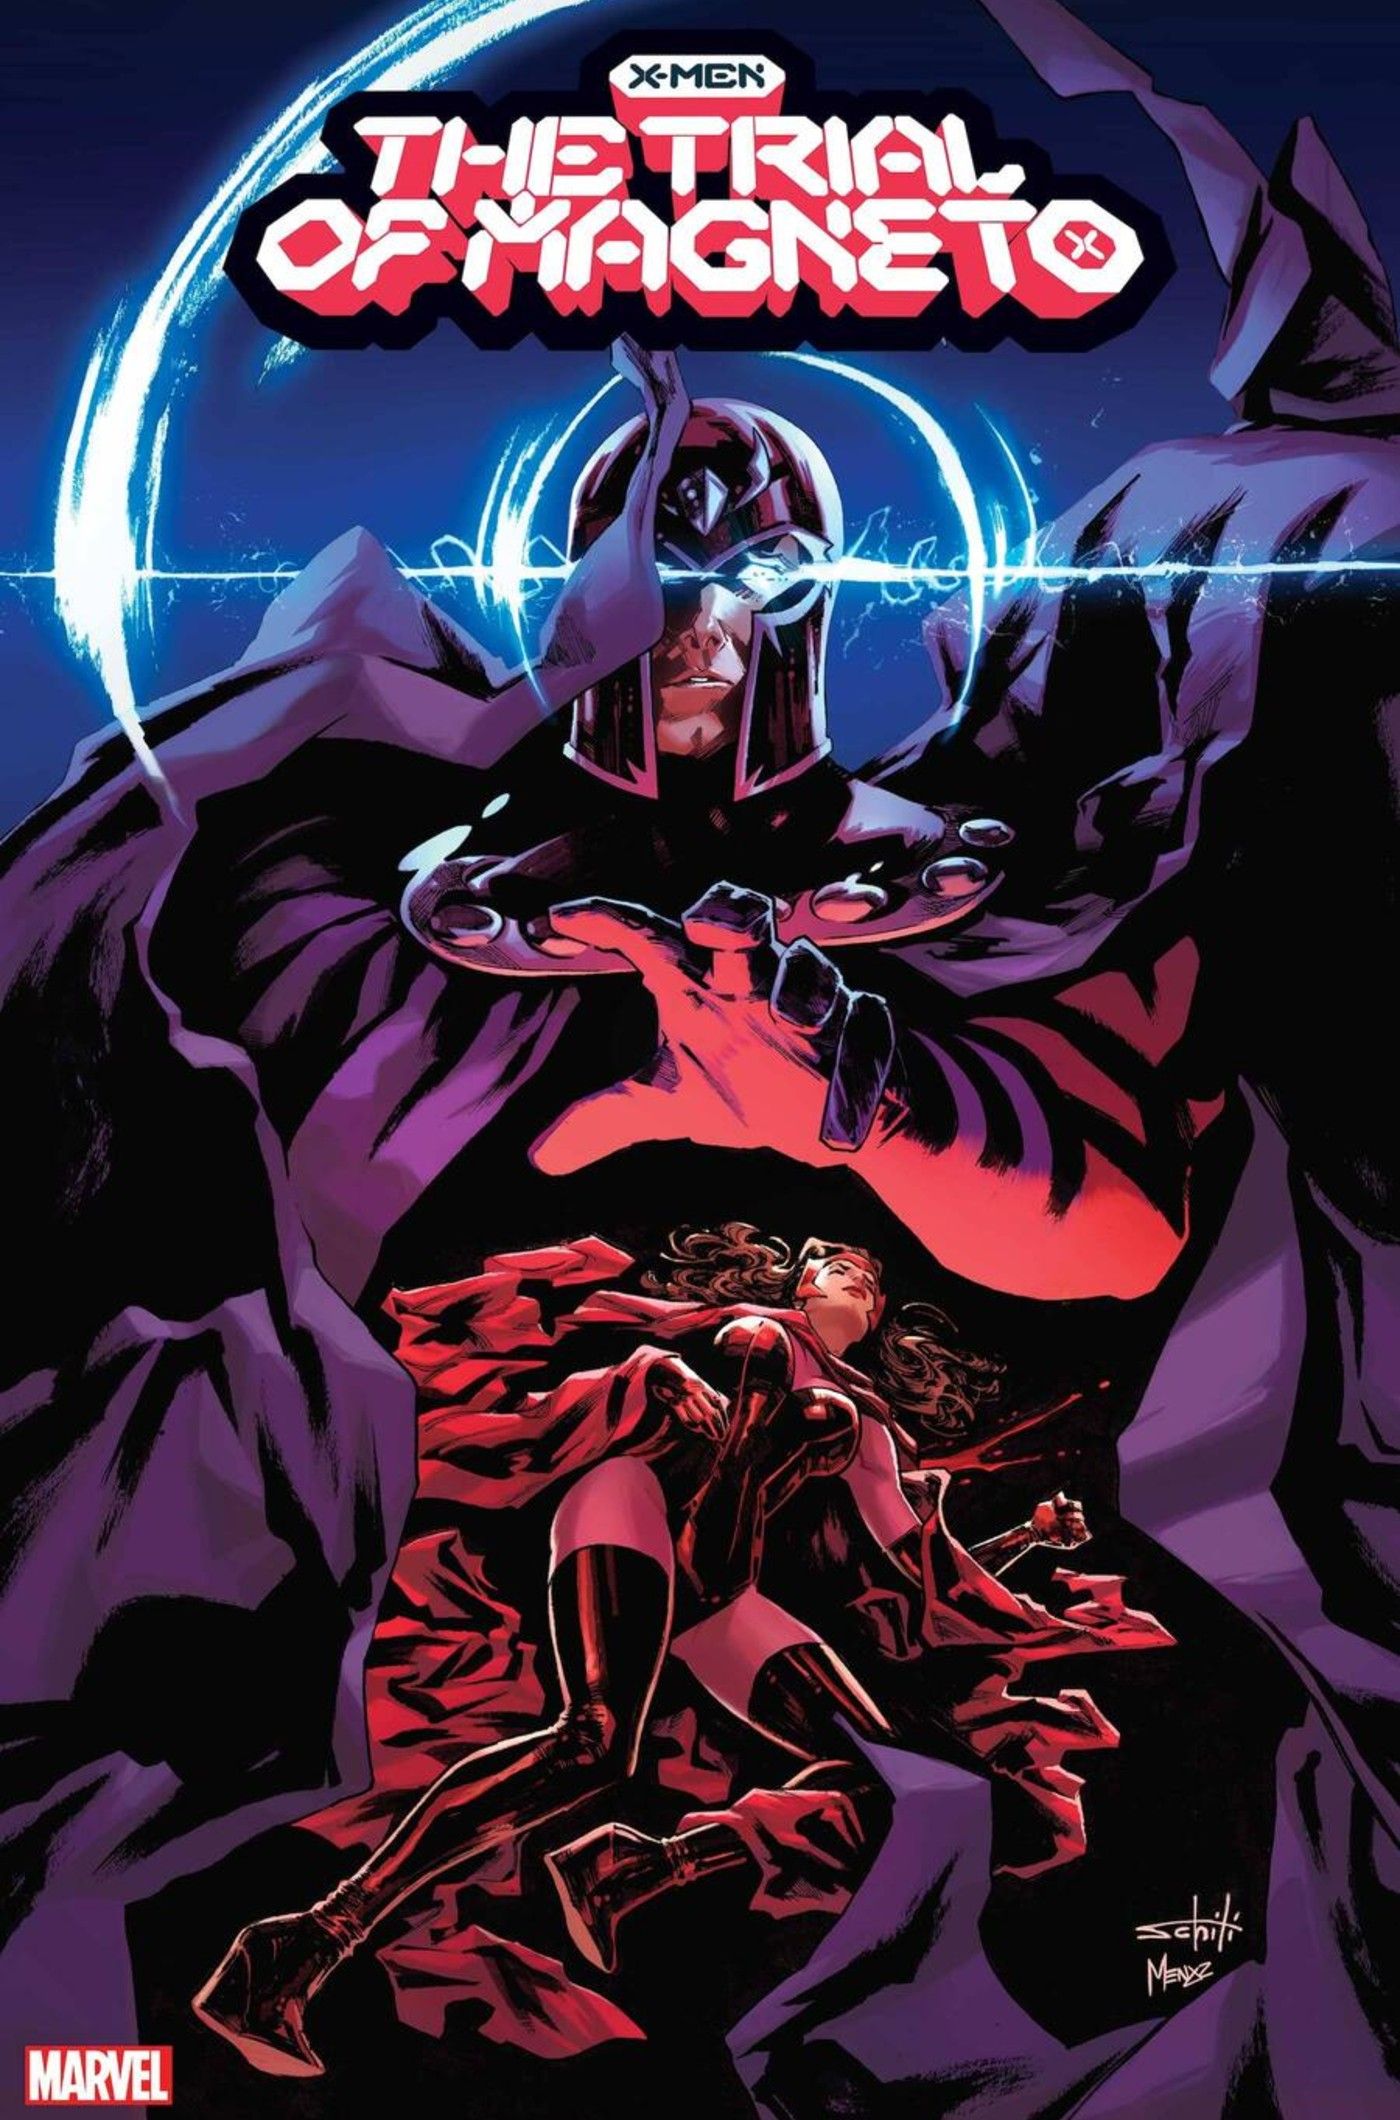 Marvel Reveals Scarlet Witch Variant Covers for the Trial of Magneto